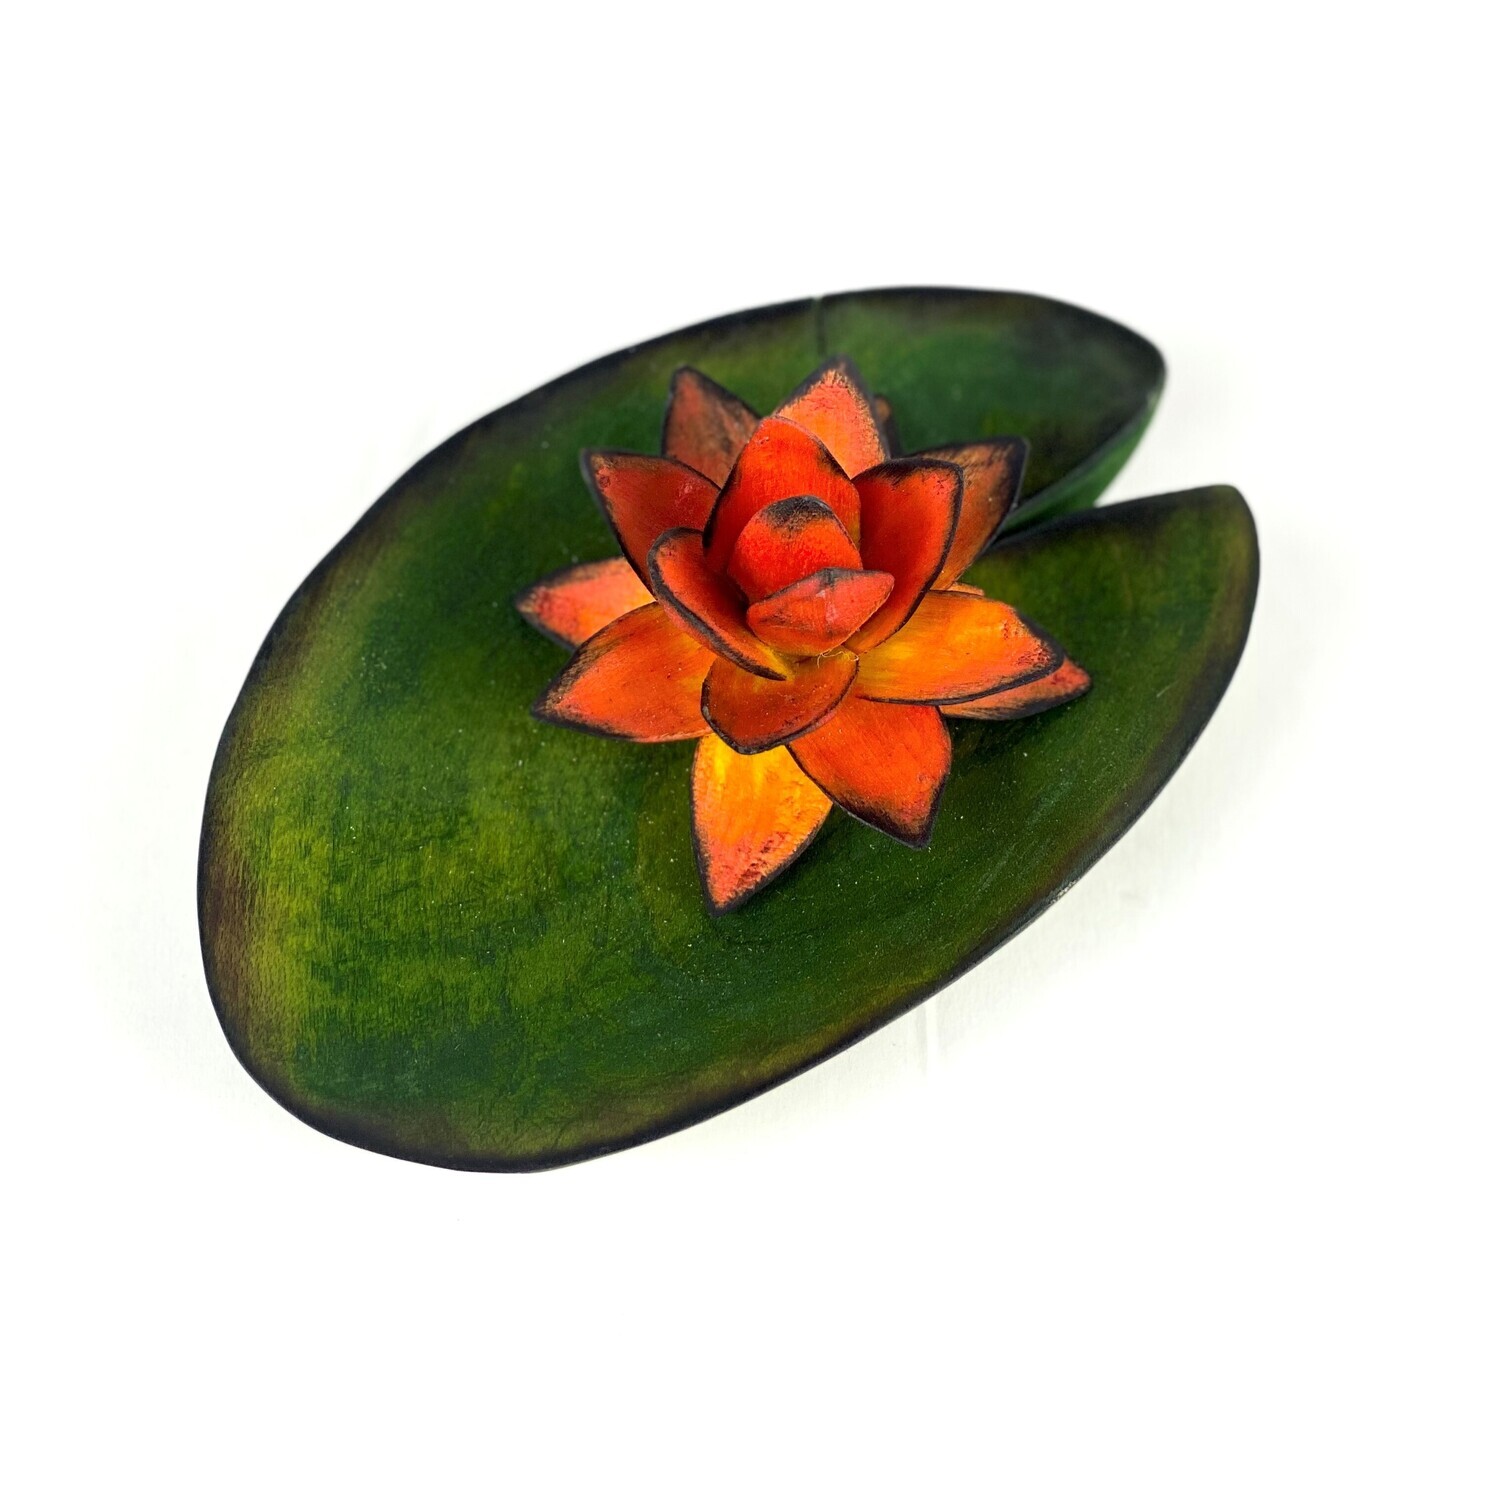 Lily Pad Dyed, Wooden Wall Hanging